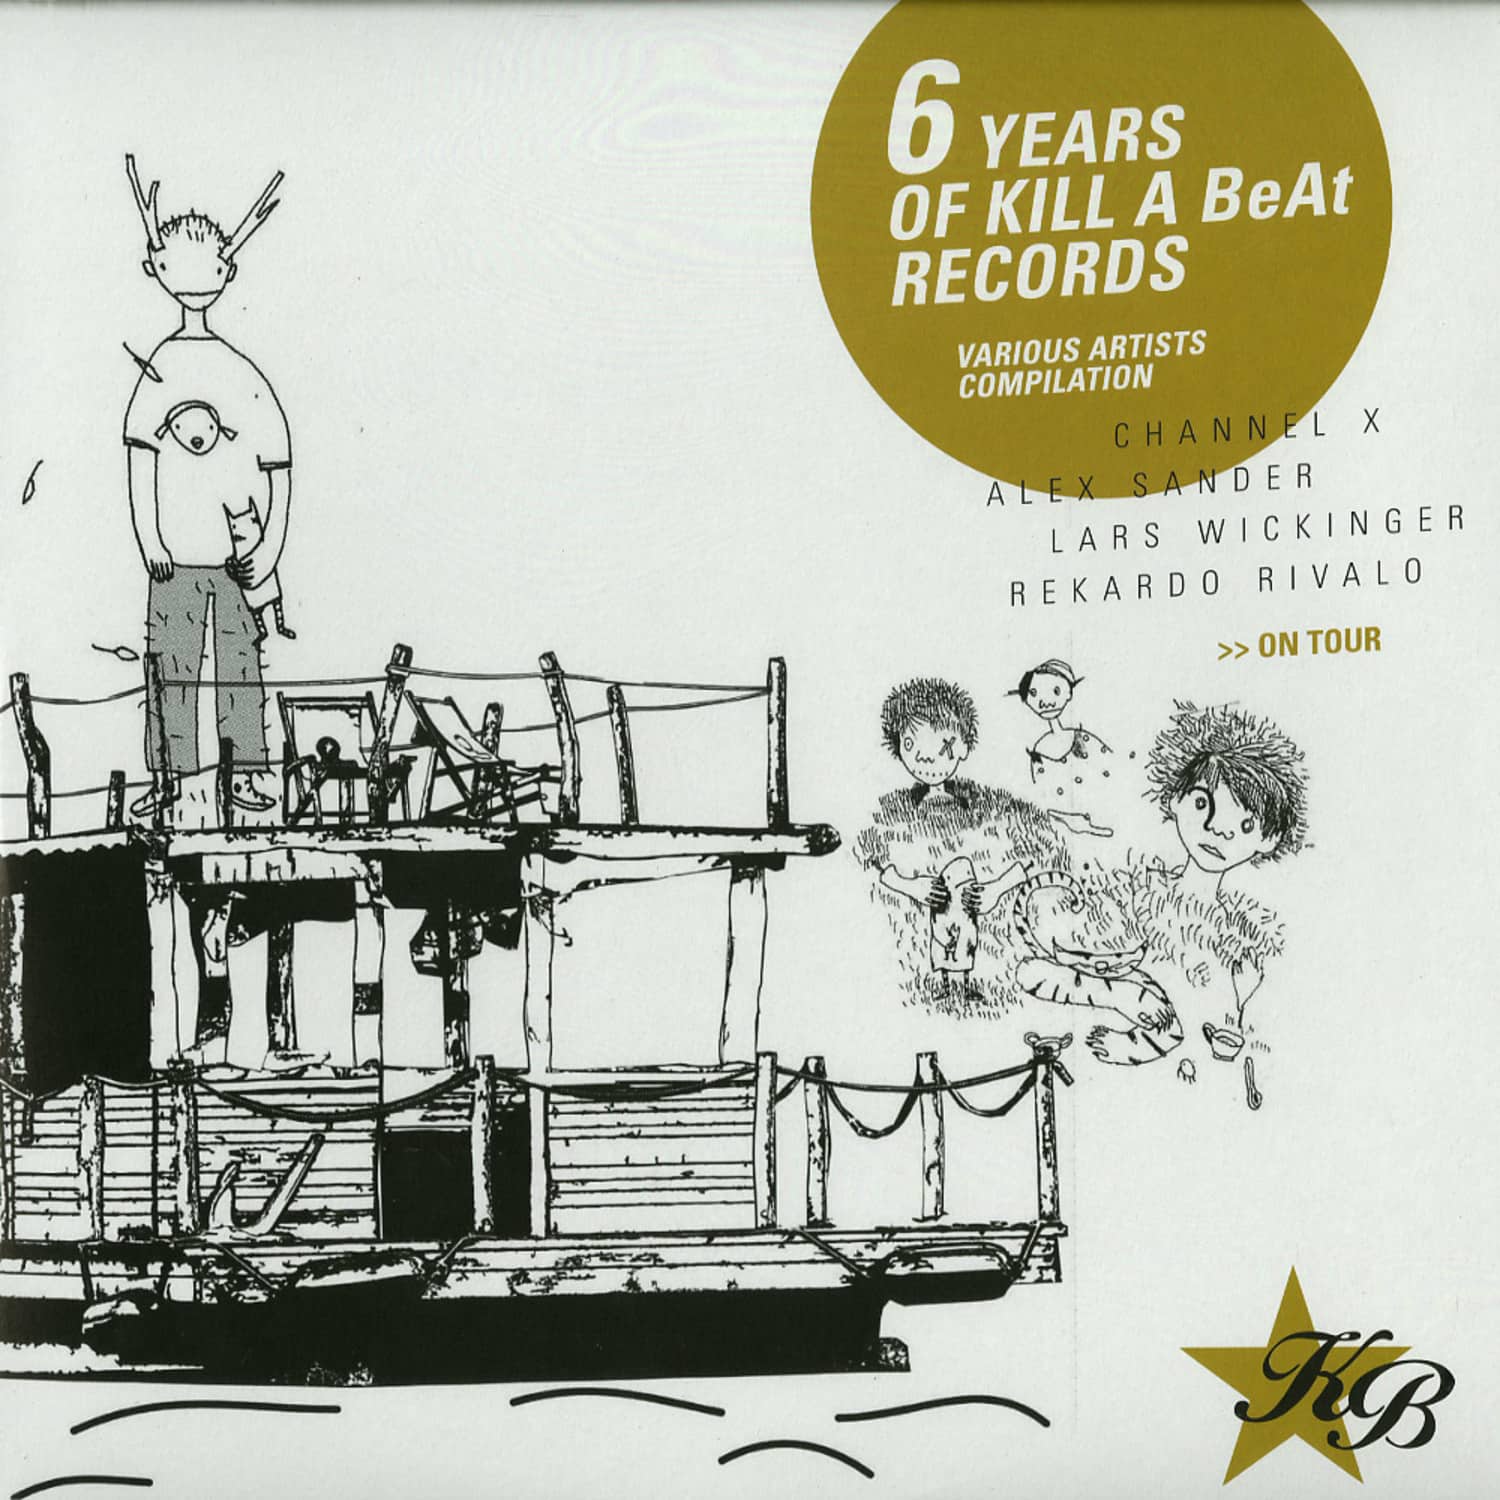 Various Artists - 6 YEARS OF KILL A BEAT RECORDS